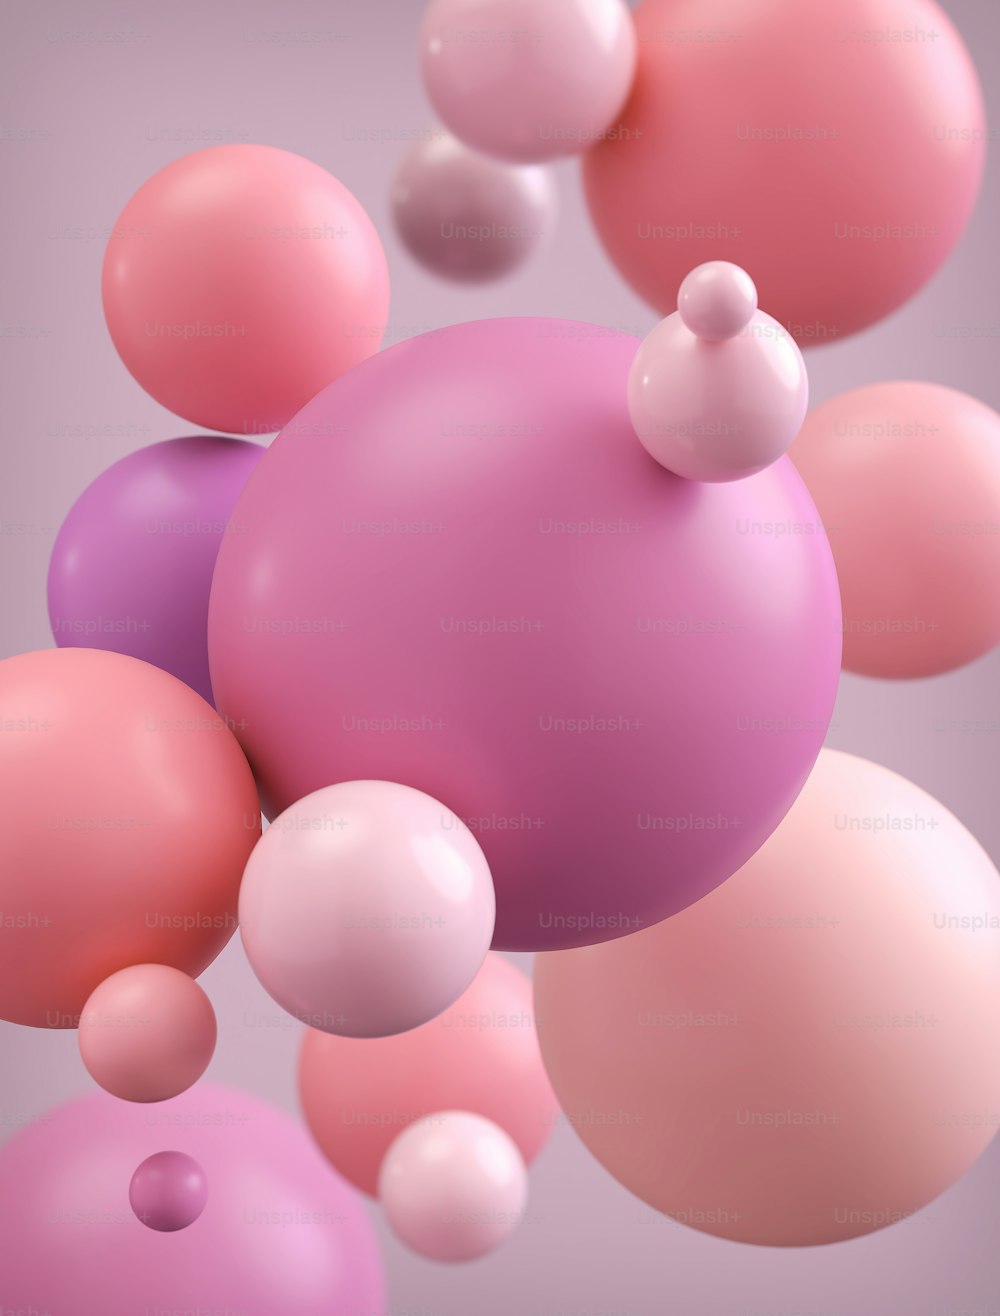 Abstract background of modern ball or spheres in pastel color, 3d rendering.